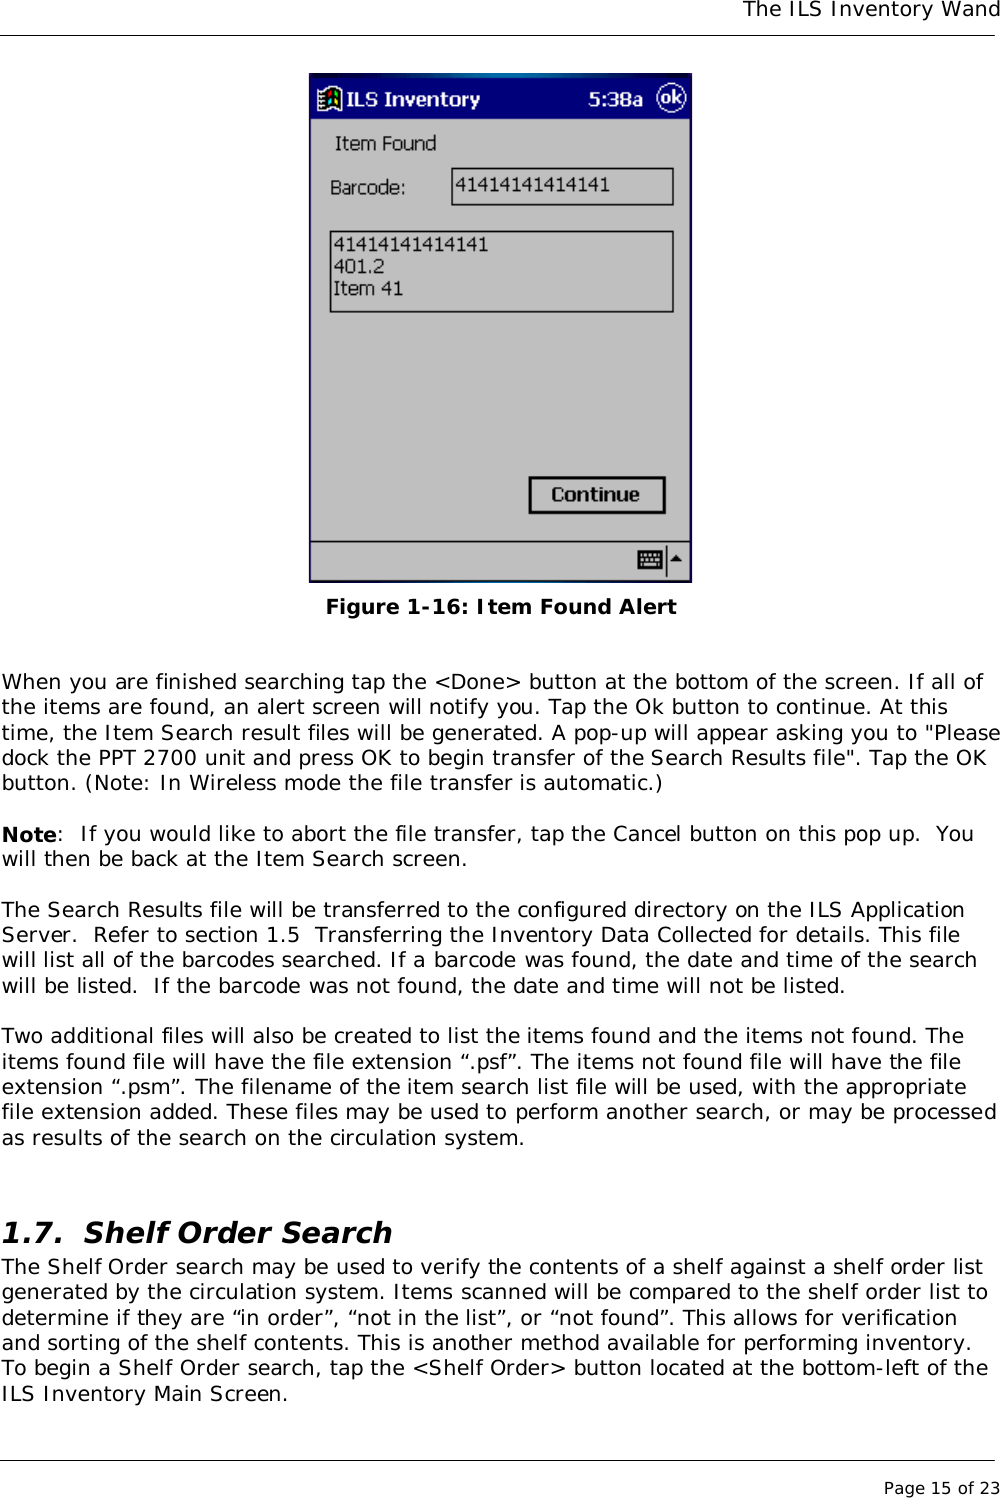 The ILS Inventory WandPage 15 of 23 Figure 1-16: Item Found AlertWhen you are finished searching tap the &lt;Done&gt; button at the bottom of the screen. If all ofthe items are found, an alert screen will notify you. Tap the Ok button to continue. At thistime, the Item Search result files will be generated. A pop-up will appear asking you to &quot;Pleasedock the PPT 2700 unit and press OK to begin transfer of the Search Results file&quot;. Tap the OKbutton. (Note: In Wireless mode the file transfer is automatic.)Note:  If you would like to abort the file transfer, tap the Cancel button on this pop up.  Youwill then be back at the Item Search screen.The Search Results file will be transferred to the configured directory on the ILS ApplicationServer.  Refer to section 1.5  Transferring the Inventory Data Collected for details. This filewill list all of the barcodes searched. If a barcode was found, the date and time of the searchwill be listed.  If the barcode was not found, the date and time will not be listed.Two additional files will also be created to list the items found and the items not found. Theitems found file will have the file extension “.psf”. The items not found file will have the fileextension “.psm”. The filename of the item search list file will be used, with the appropriatefile extension added. These files may be used to perform another search, or may be processedas results of the search on the circulation system.1.7. Shelf Order SearchThe Shelf Order search may be used to verify the contents of a shelf against a shelf order listgenerated by the circulation system. Items scanned will be compared to the shelf order list todetermine if they are “in order”, “not in the list”, or “not found”. This allows for verificationand sorting of the shelf contents. This is another method available for performing inventory.To begin a Shelf Order search, tap the &lt;Shelf Order&gt; button located at the bottom-left of theILS Inventory Main Screen.